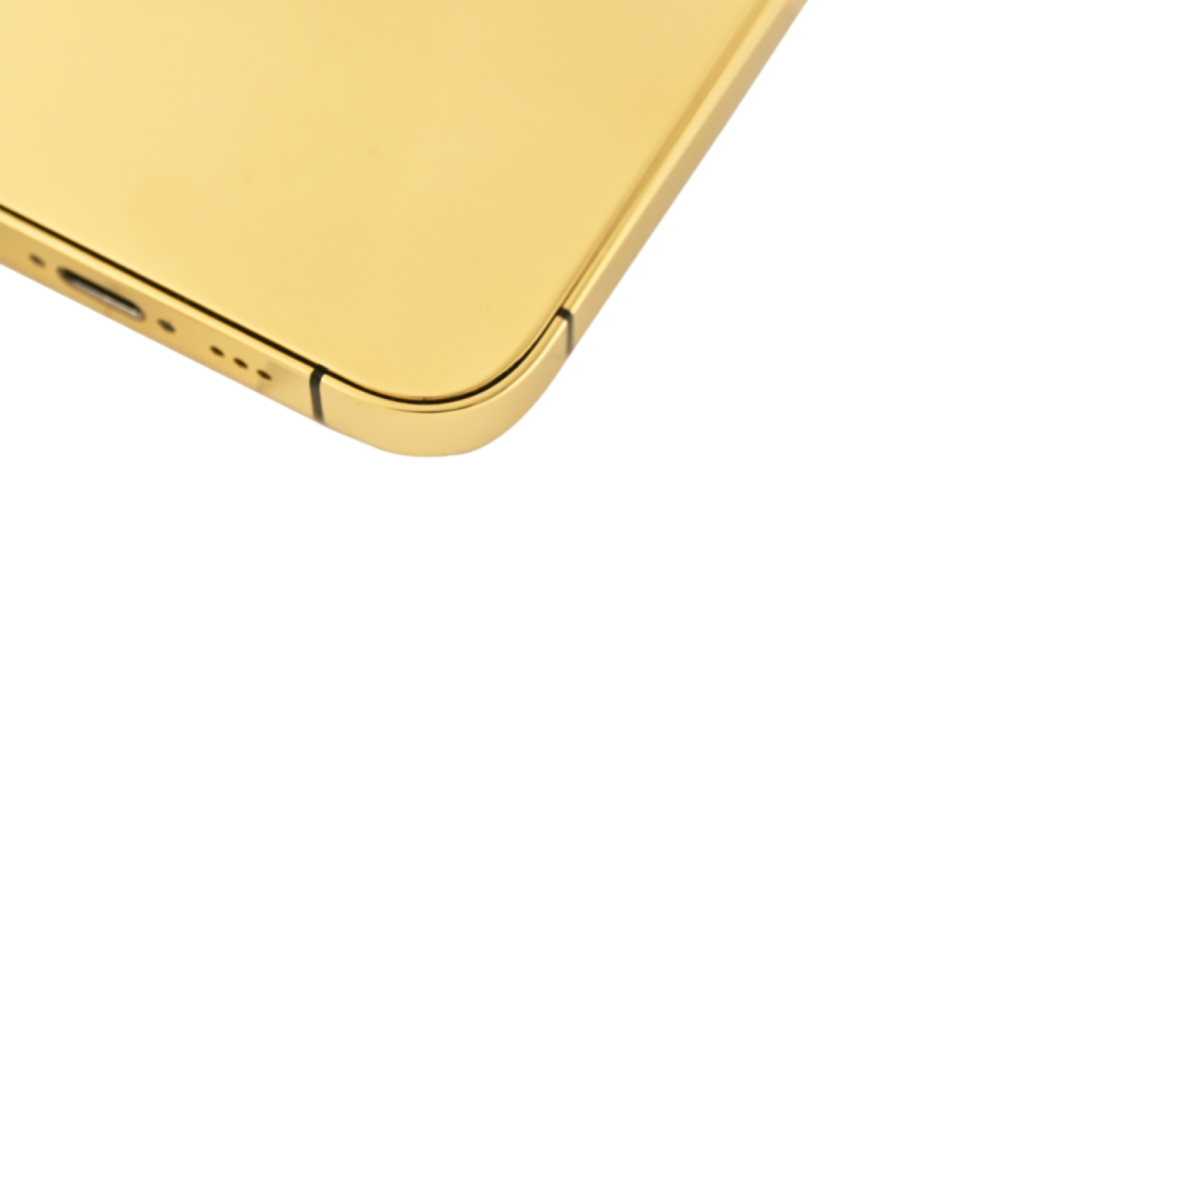 Caviar Luxury 24k Full Gold Customized iPhone 14 Pro Max 512 GB Limited Edition